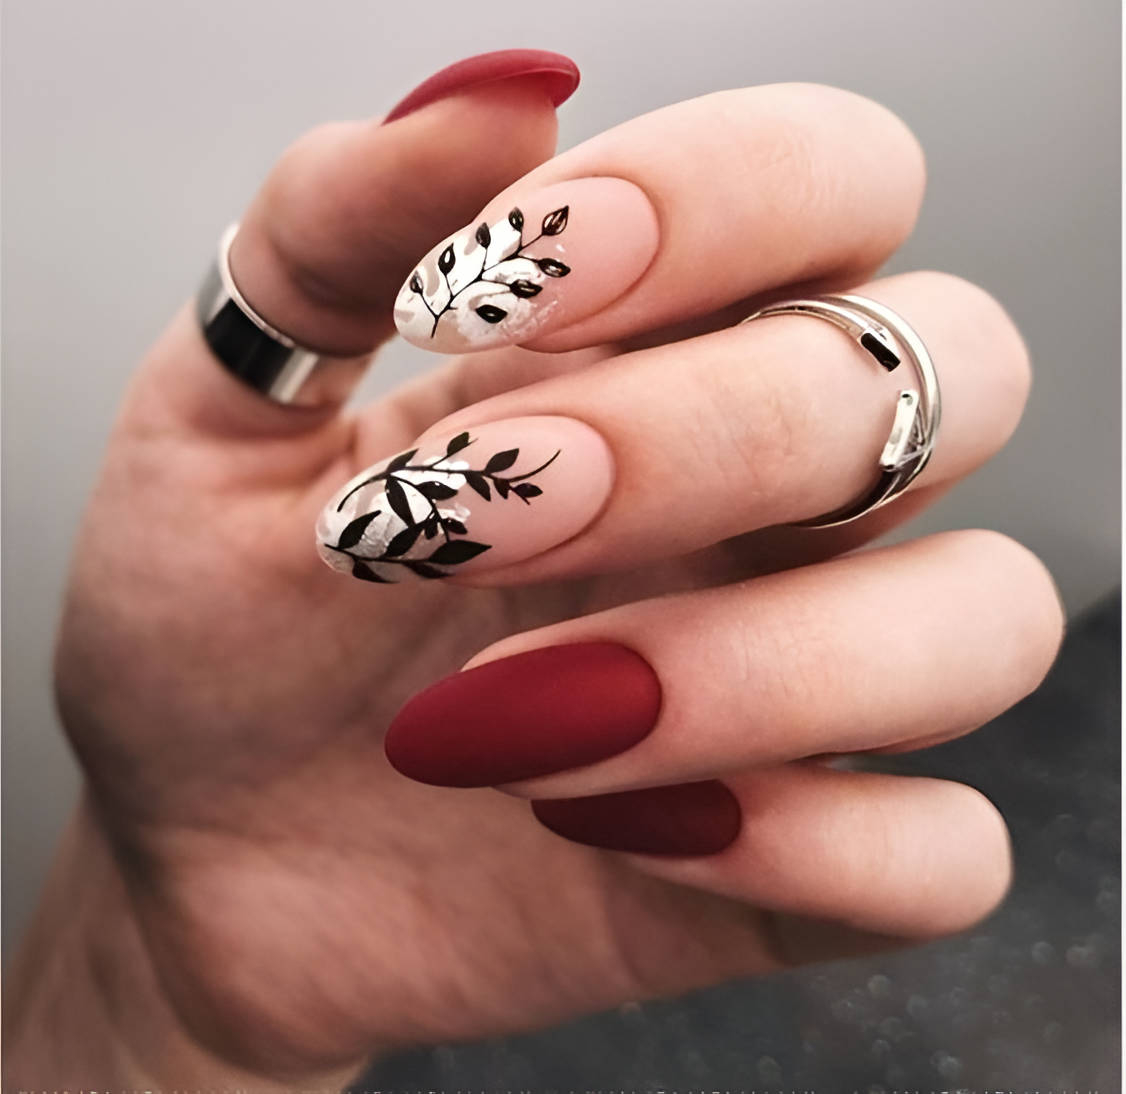 Red Nails With Floral Art